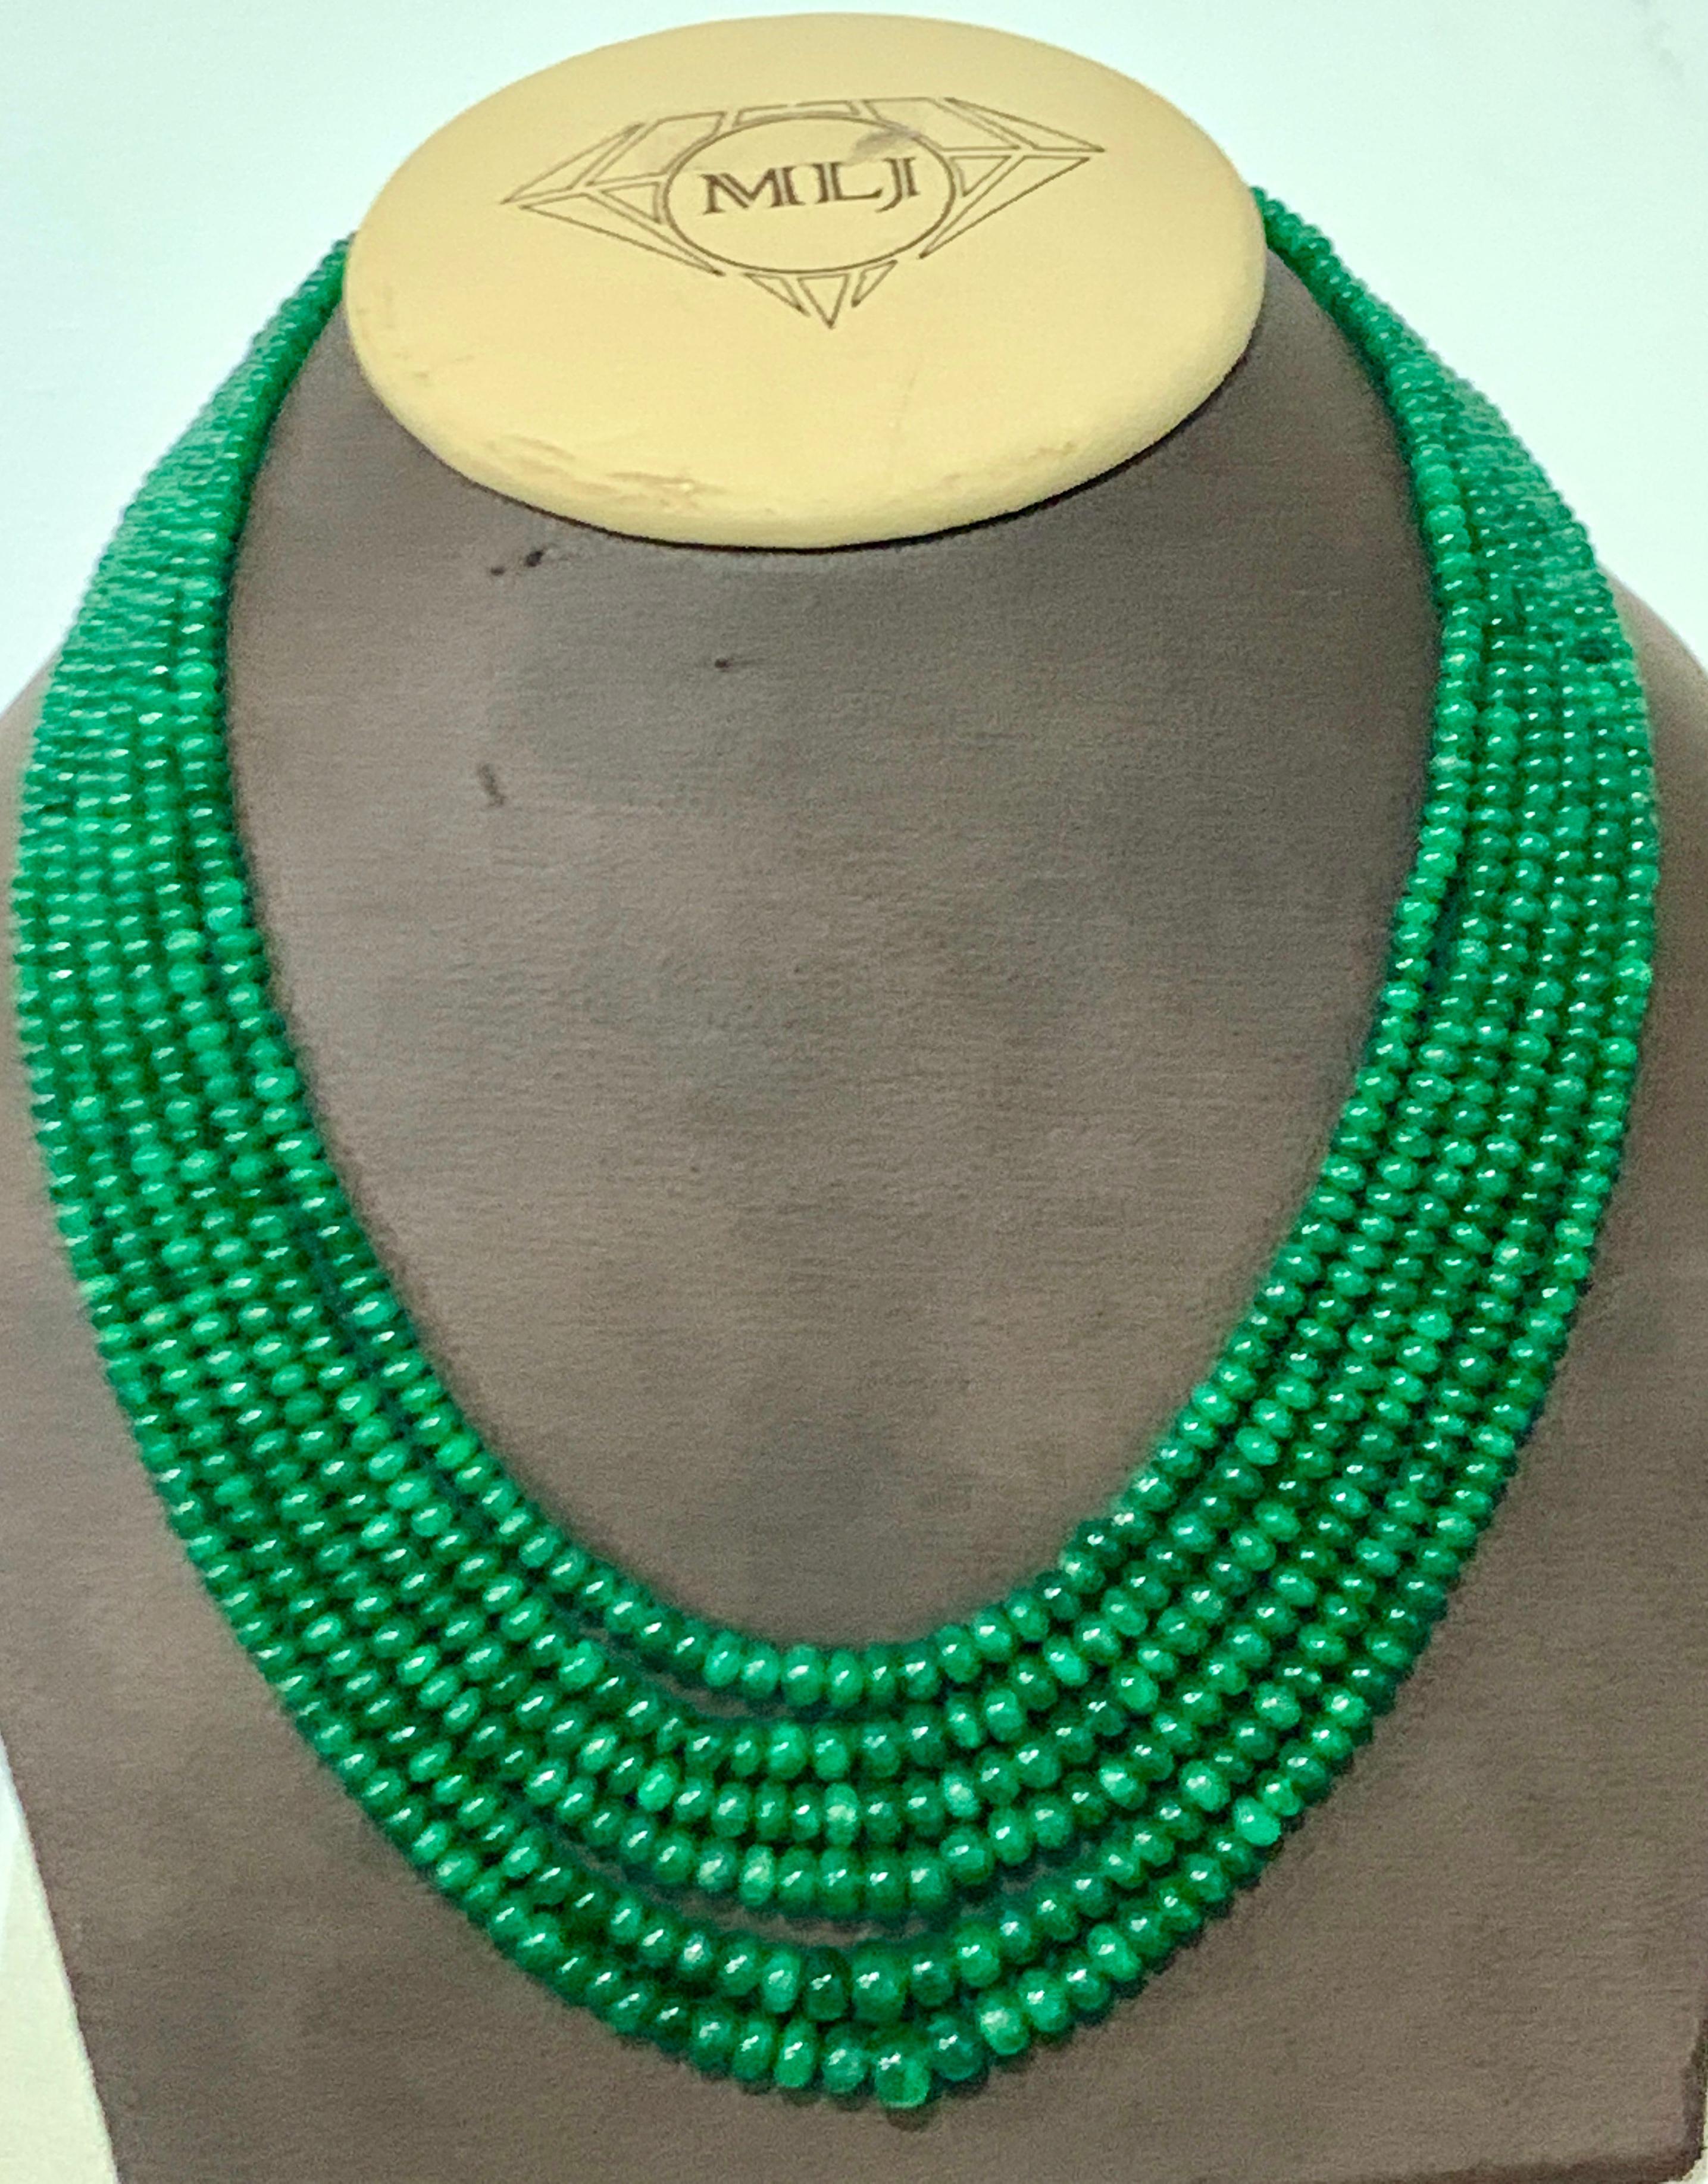 Round Cut 335 Carat 6 Layer Natural Brazilian Emerald Bead Necklace Sterling Silver Clasp